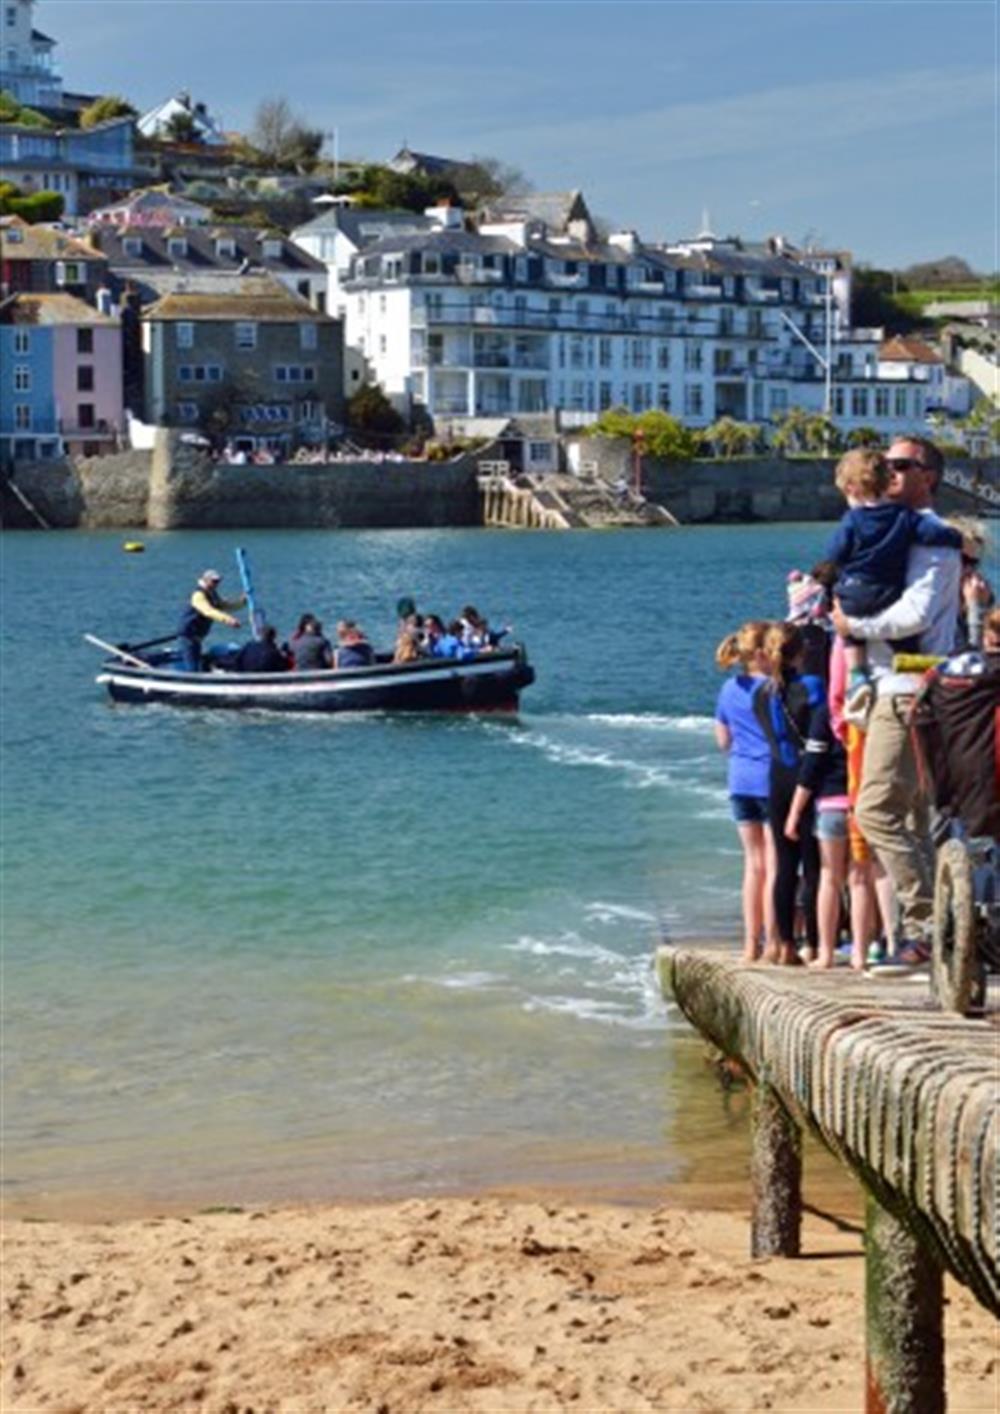 The Salcombe to East Portlemouth ferry is a fun way to visit the popular town of Salcombe.